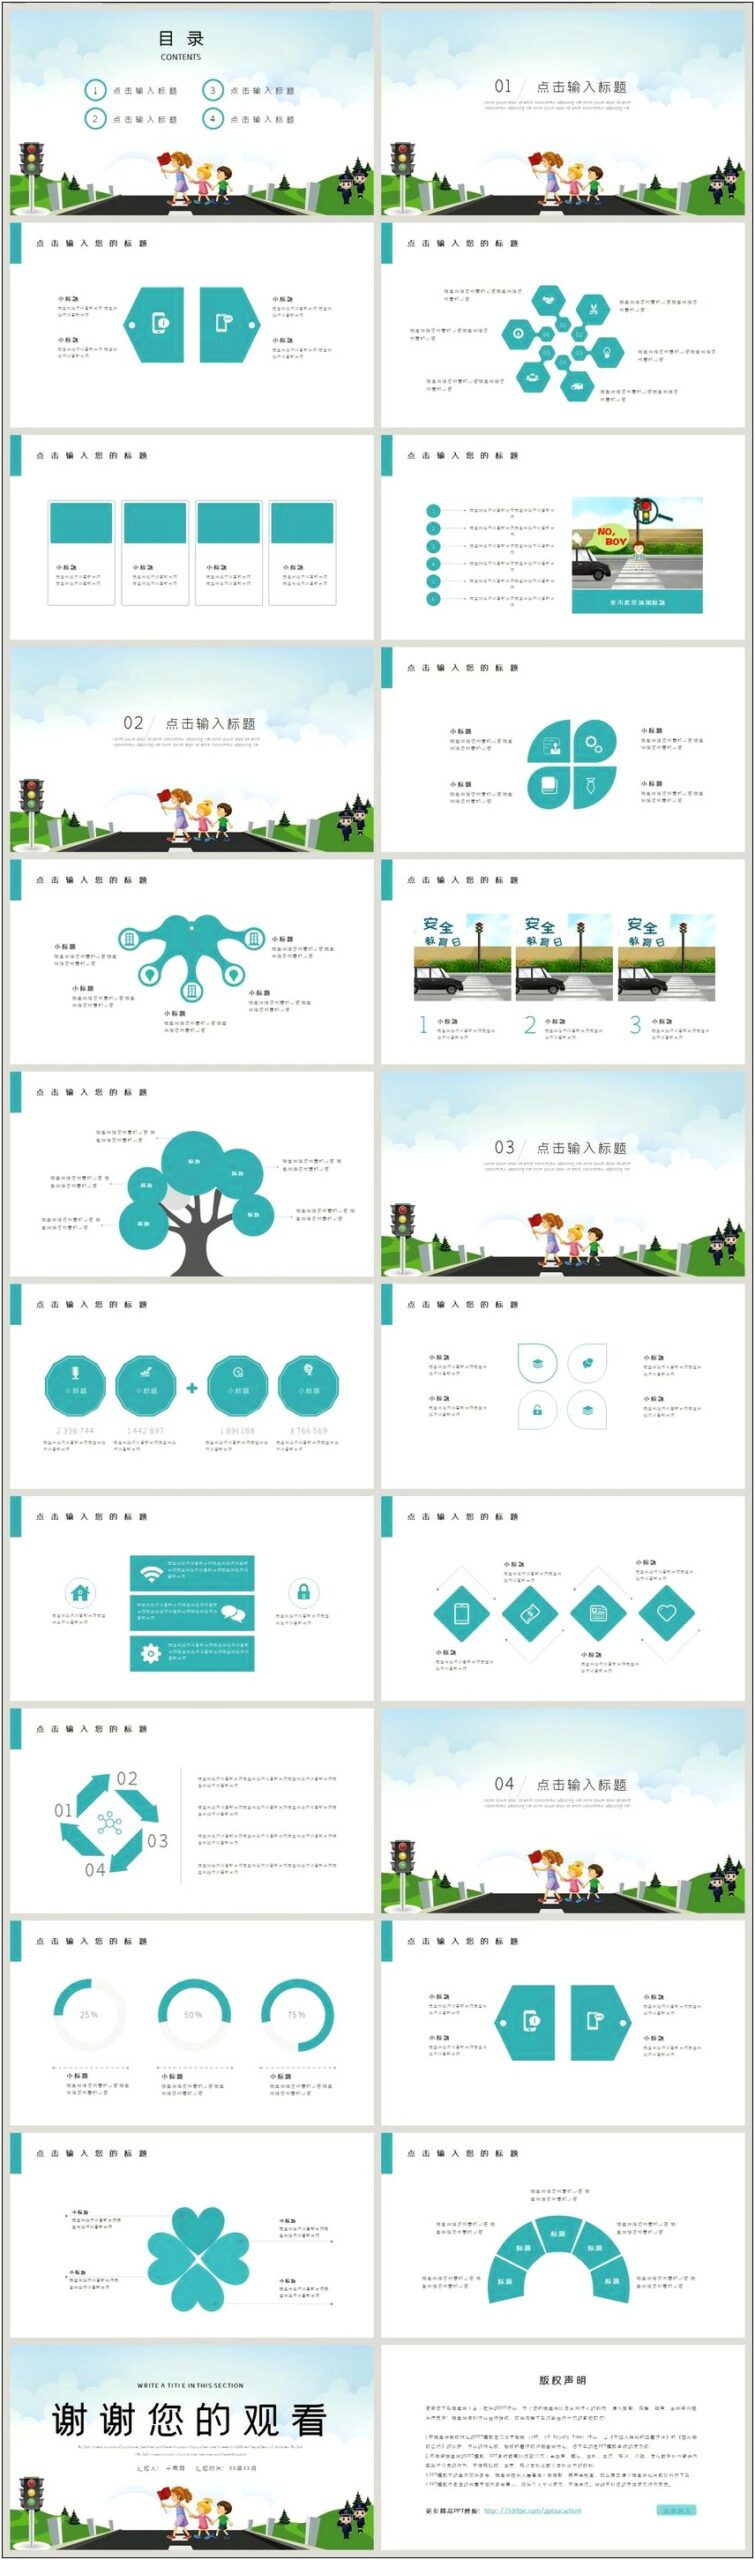 Road Safety Ppt Template Free Download